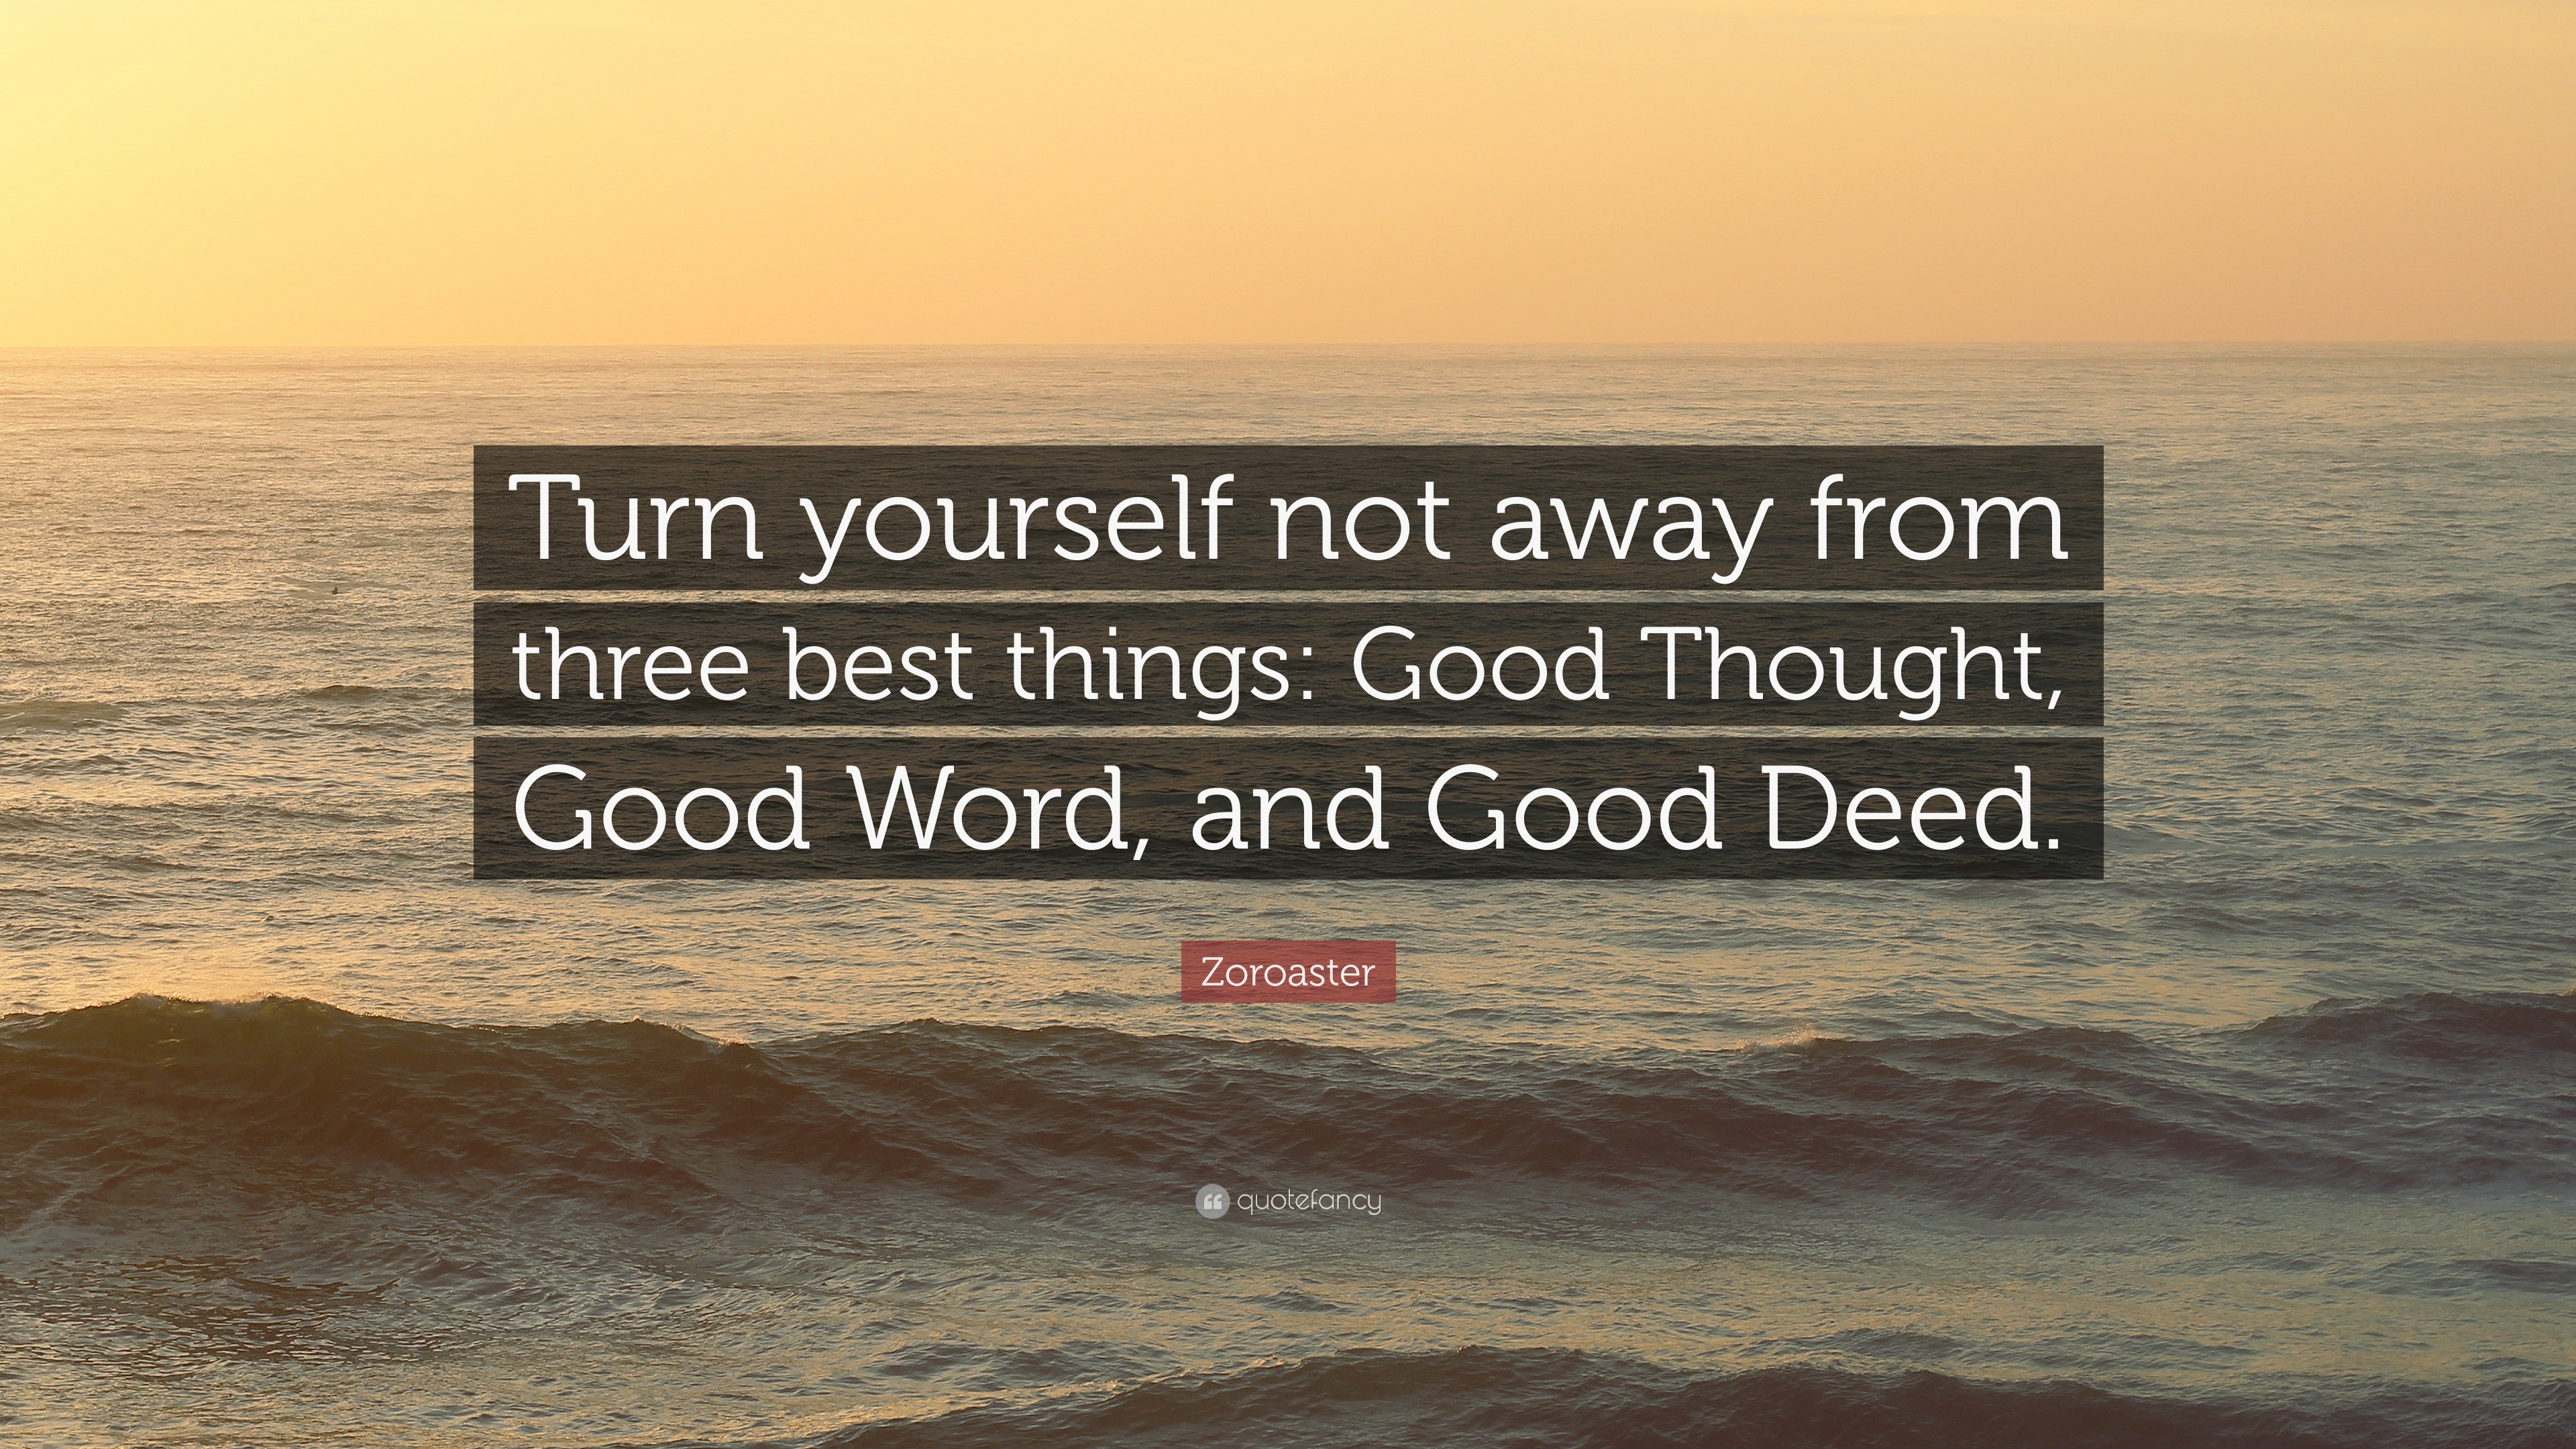 Zoroaster Quote “turn Yourself Not Away From Three Best Things Good